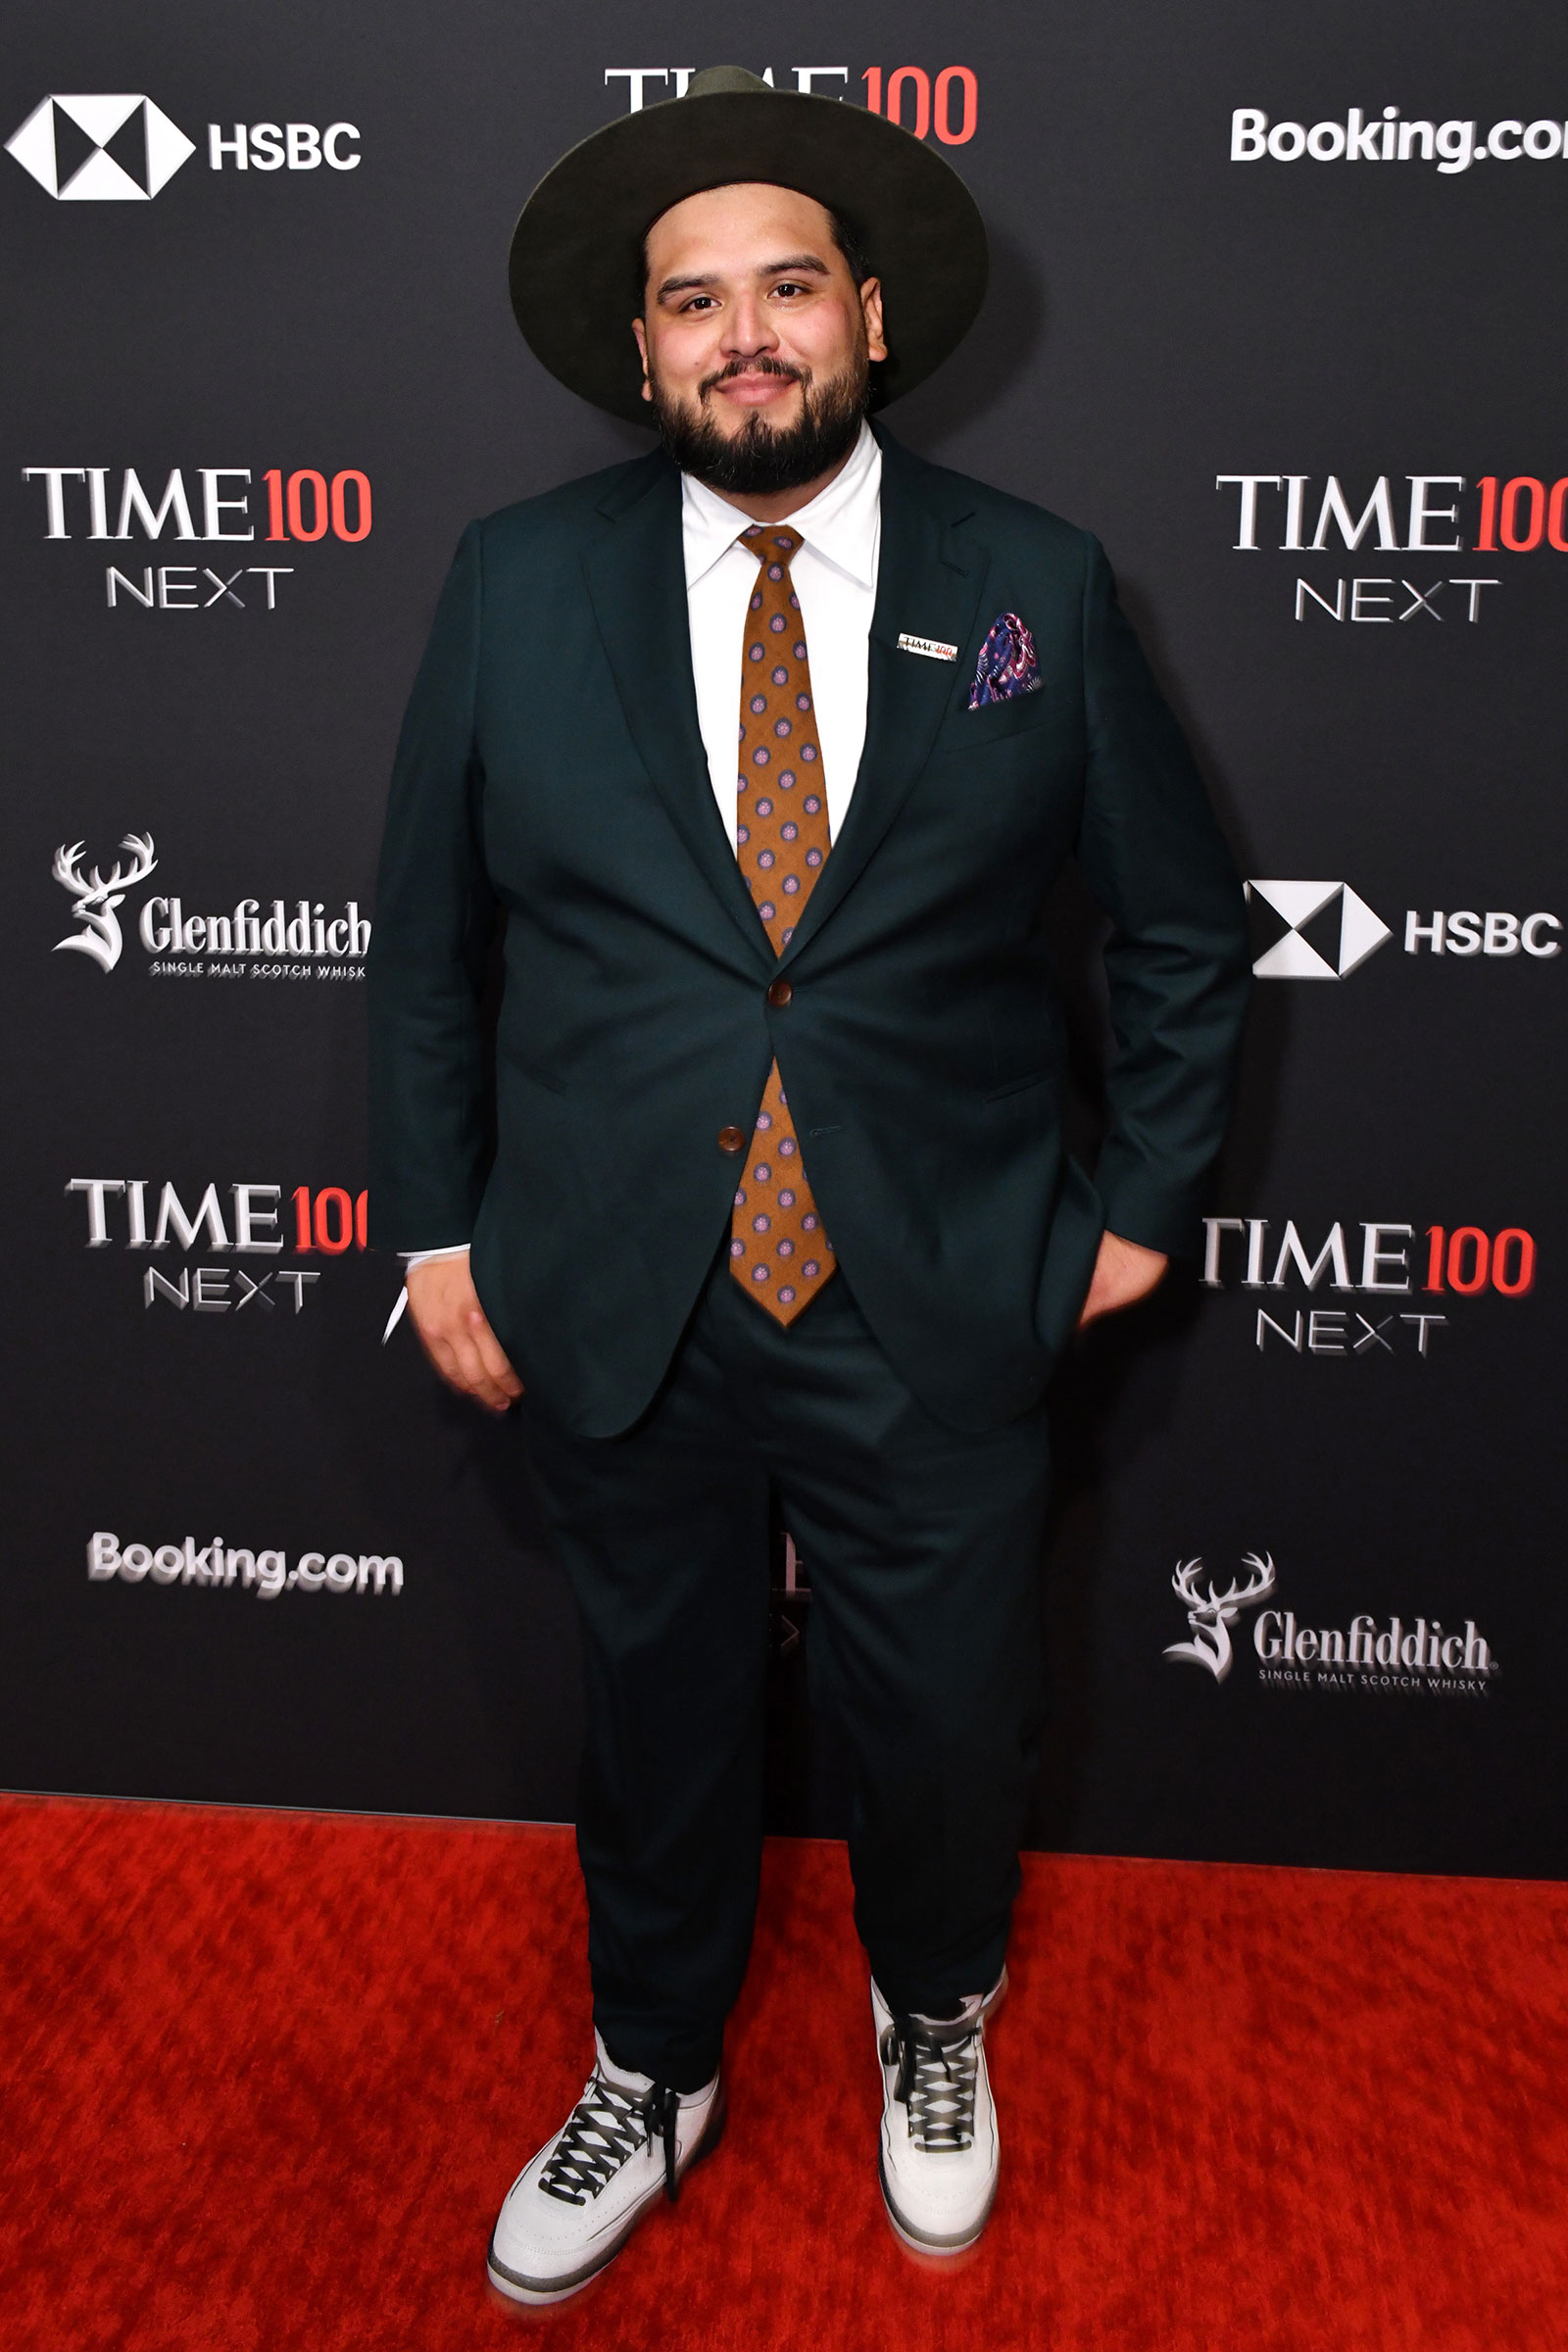 Chef Edgar Rico attends the TIME100 Next Gala in New York City on Oct. 25, 2022. (Craig Barritt—Getty Images for TIME)